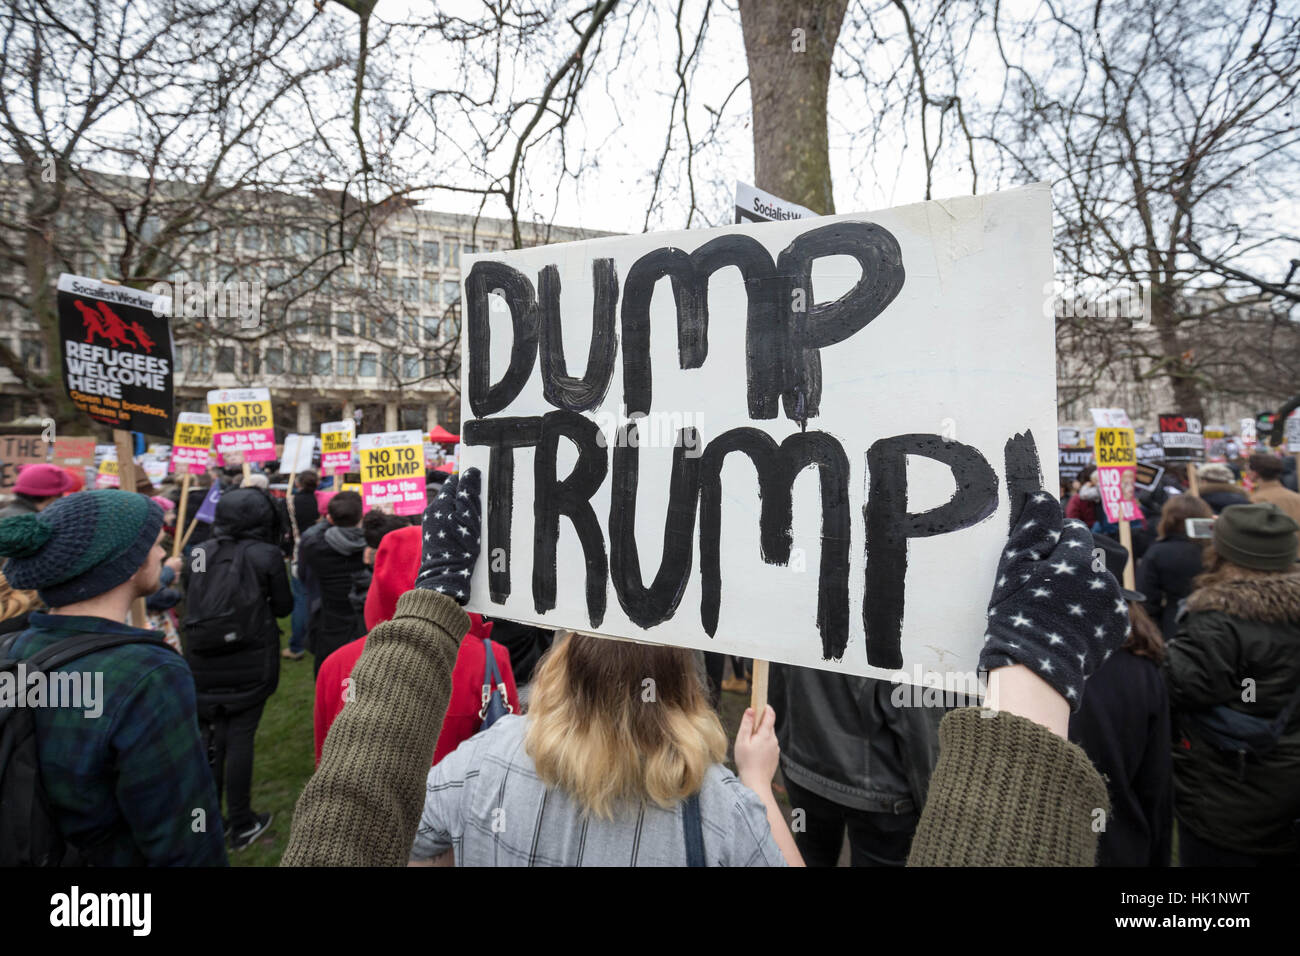 London, UK. 4th February, 2017. ‘Stop Trump’s Muslim Ban’ Thousands of supporters march and demonstrate through central London with anti-Trump placards and humorous slogans against US President Donald Trump's recent executive order limiting seven Muslim-majority countries entry to the USA. © Guy Corbishley/Alamy Live News Stock Photo